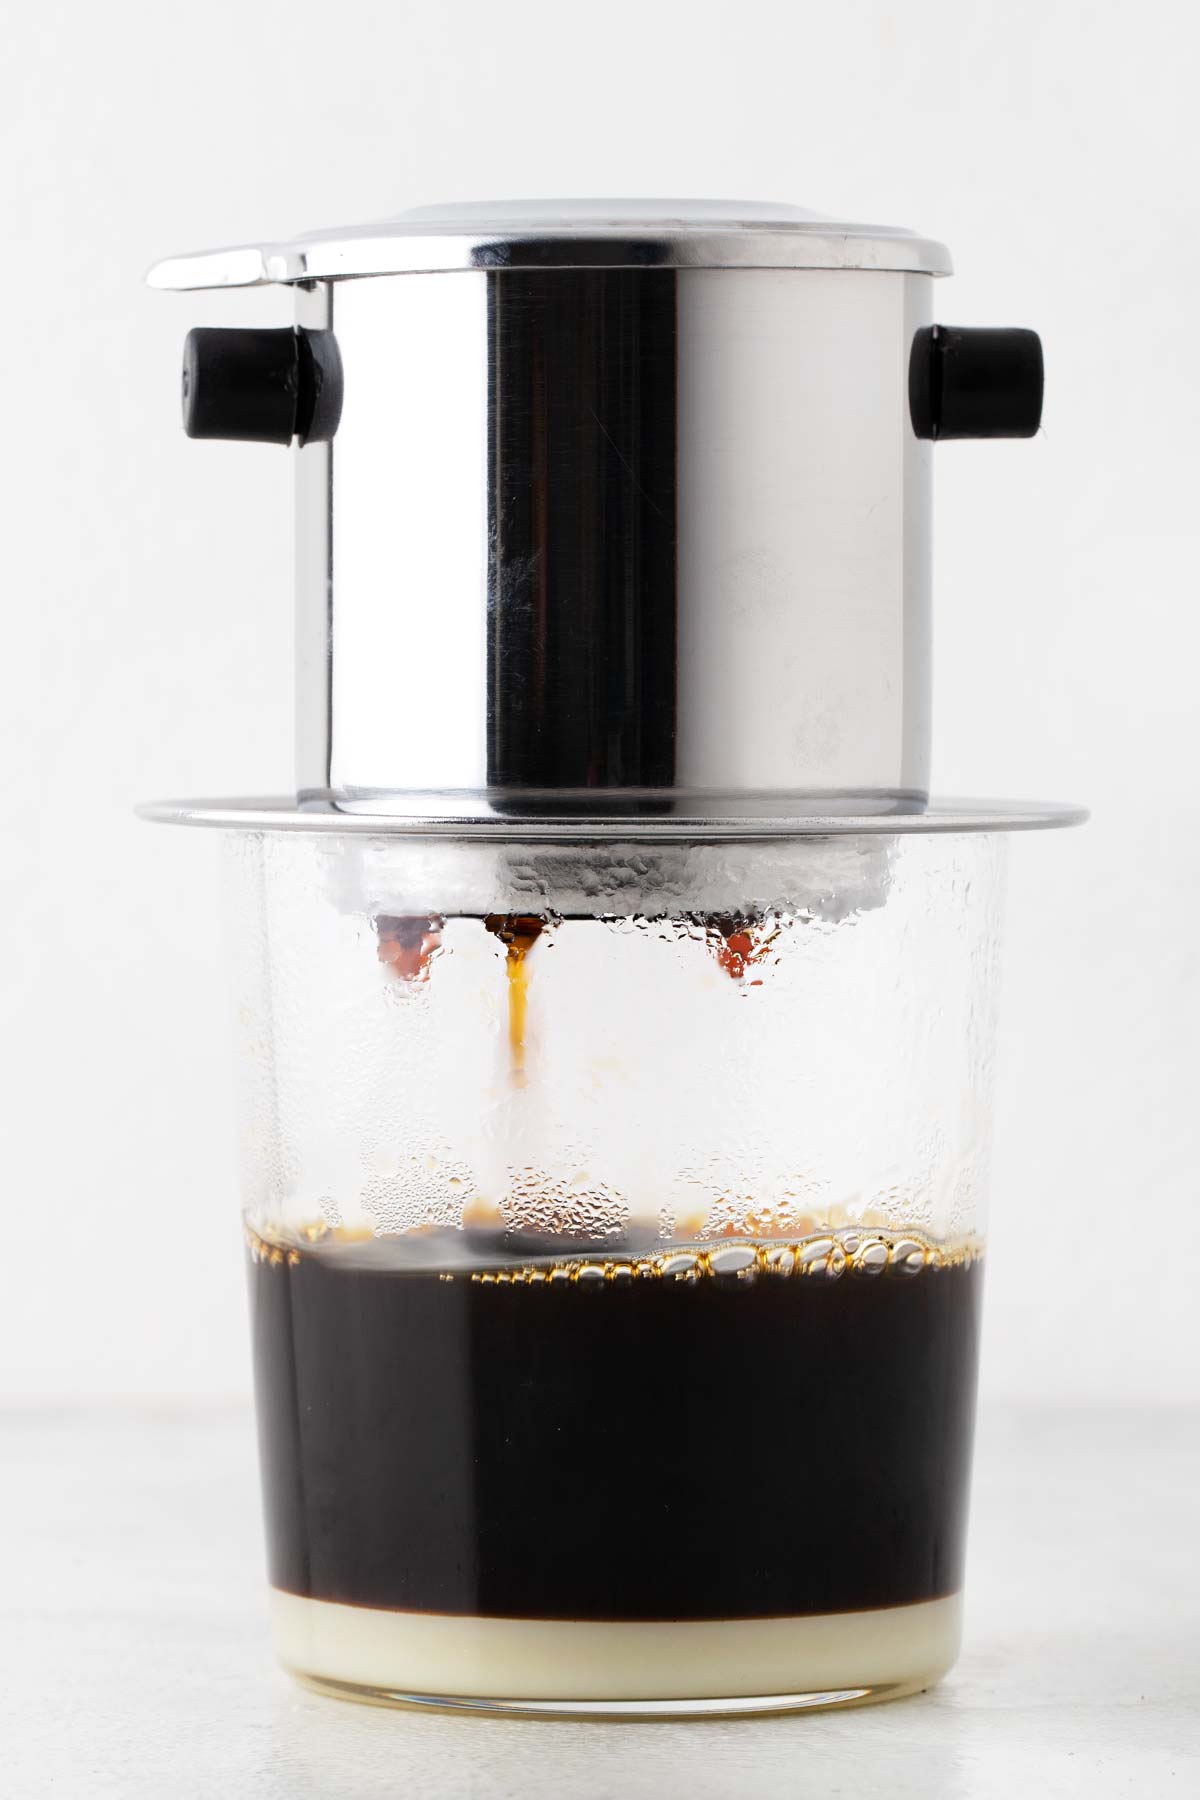 Vietnamese coffee dripping down from a phin filter.